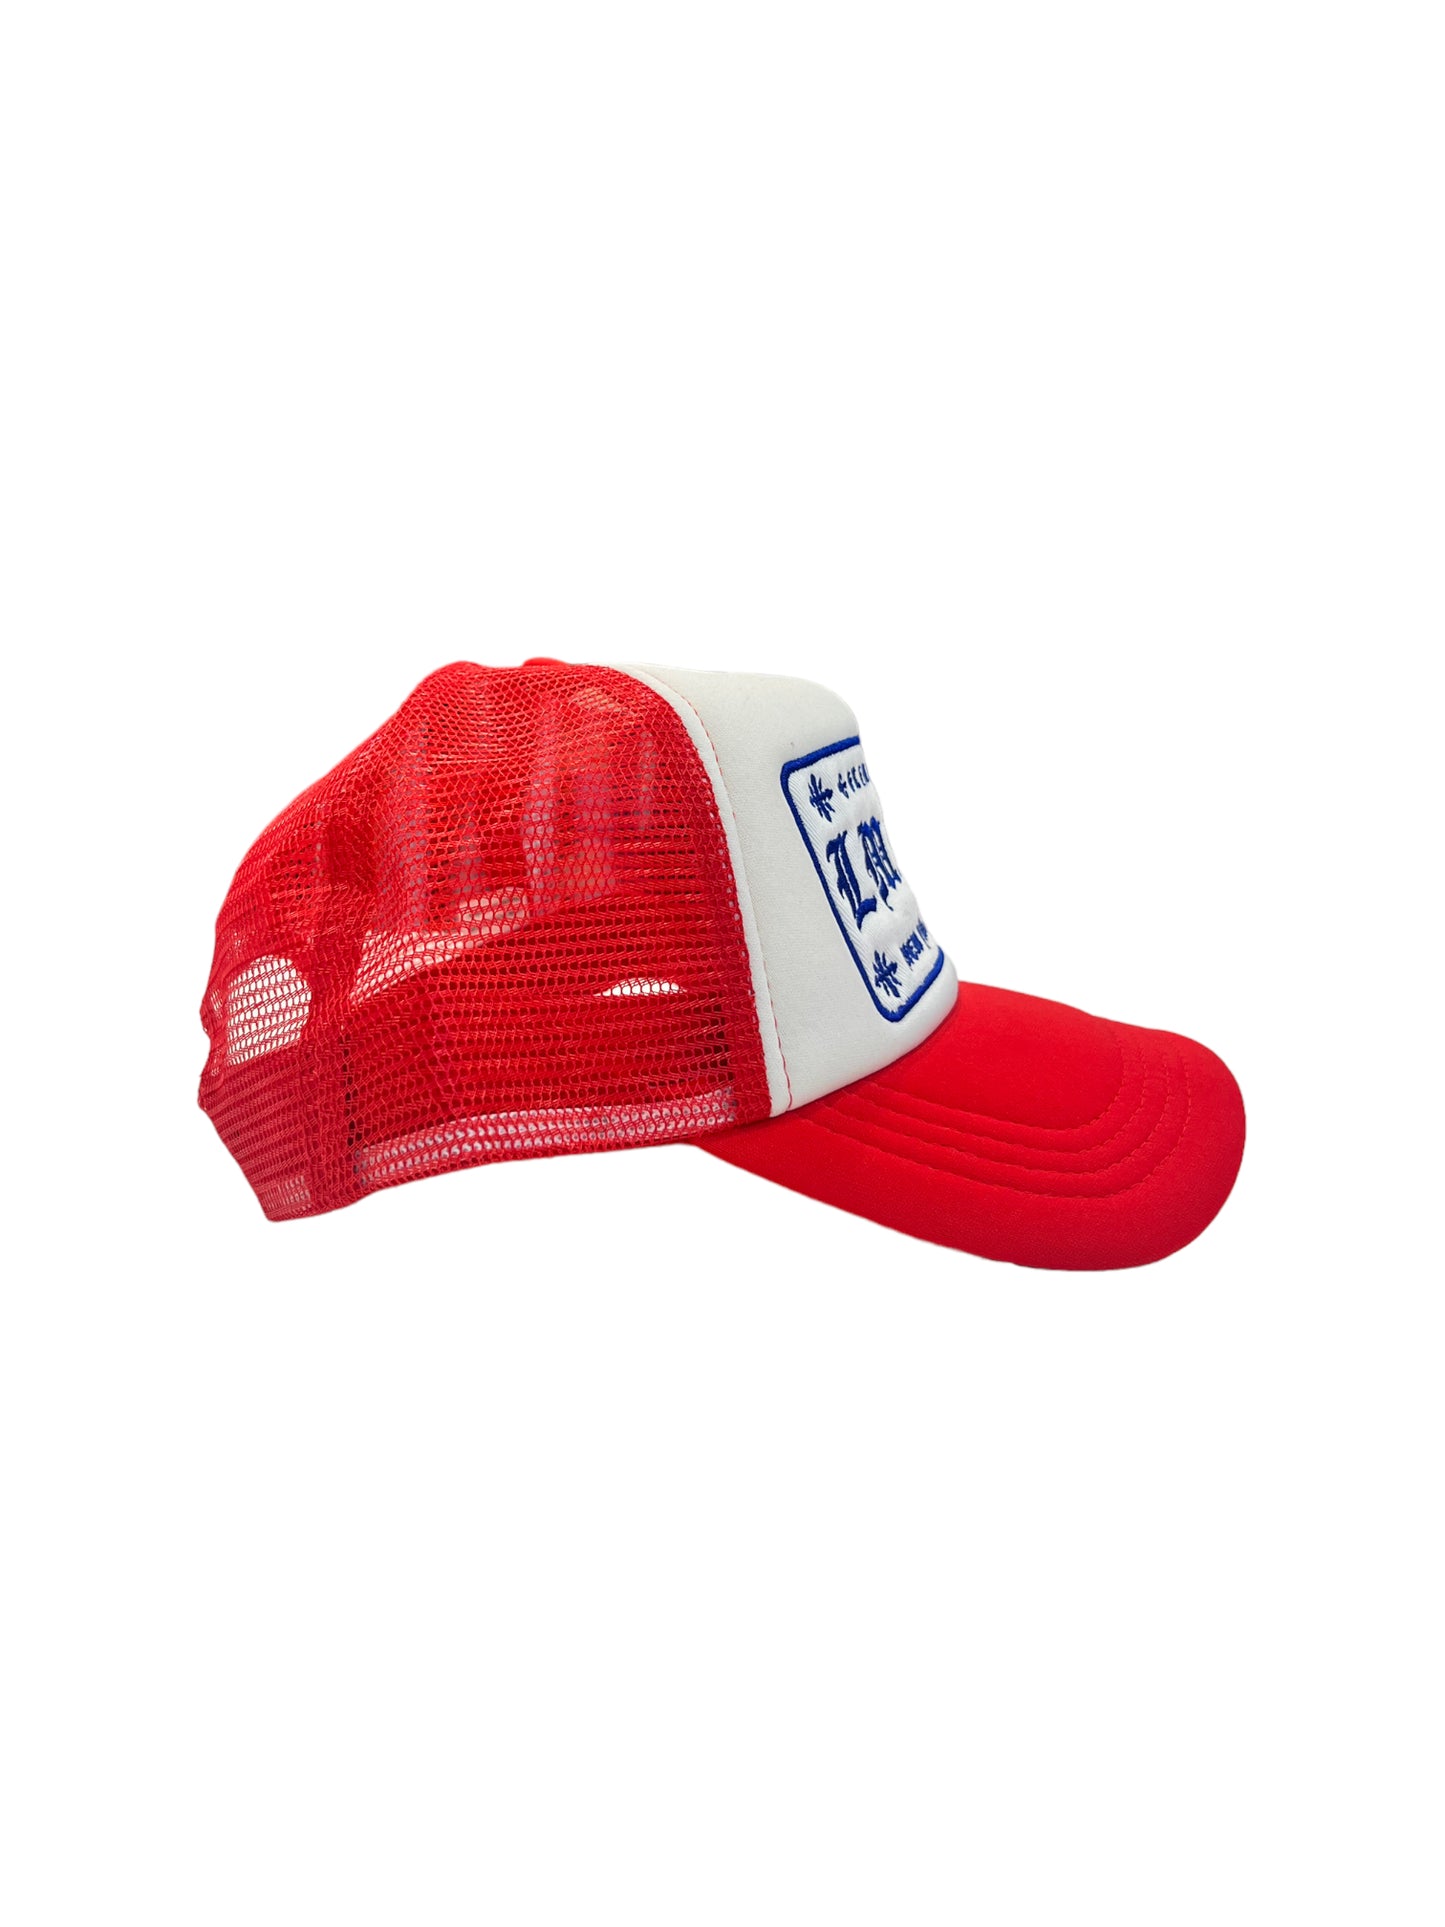 LMNTS Old English Trucker Hat (Red and White)